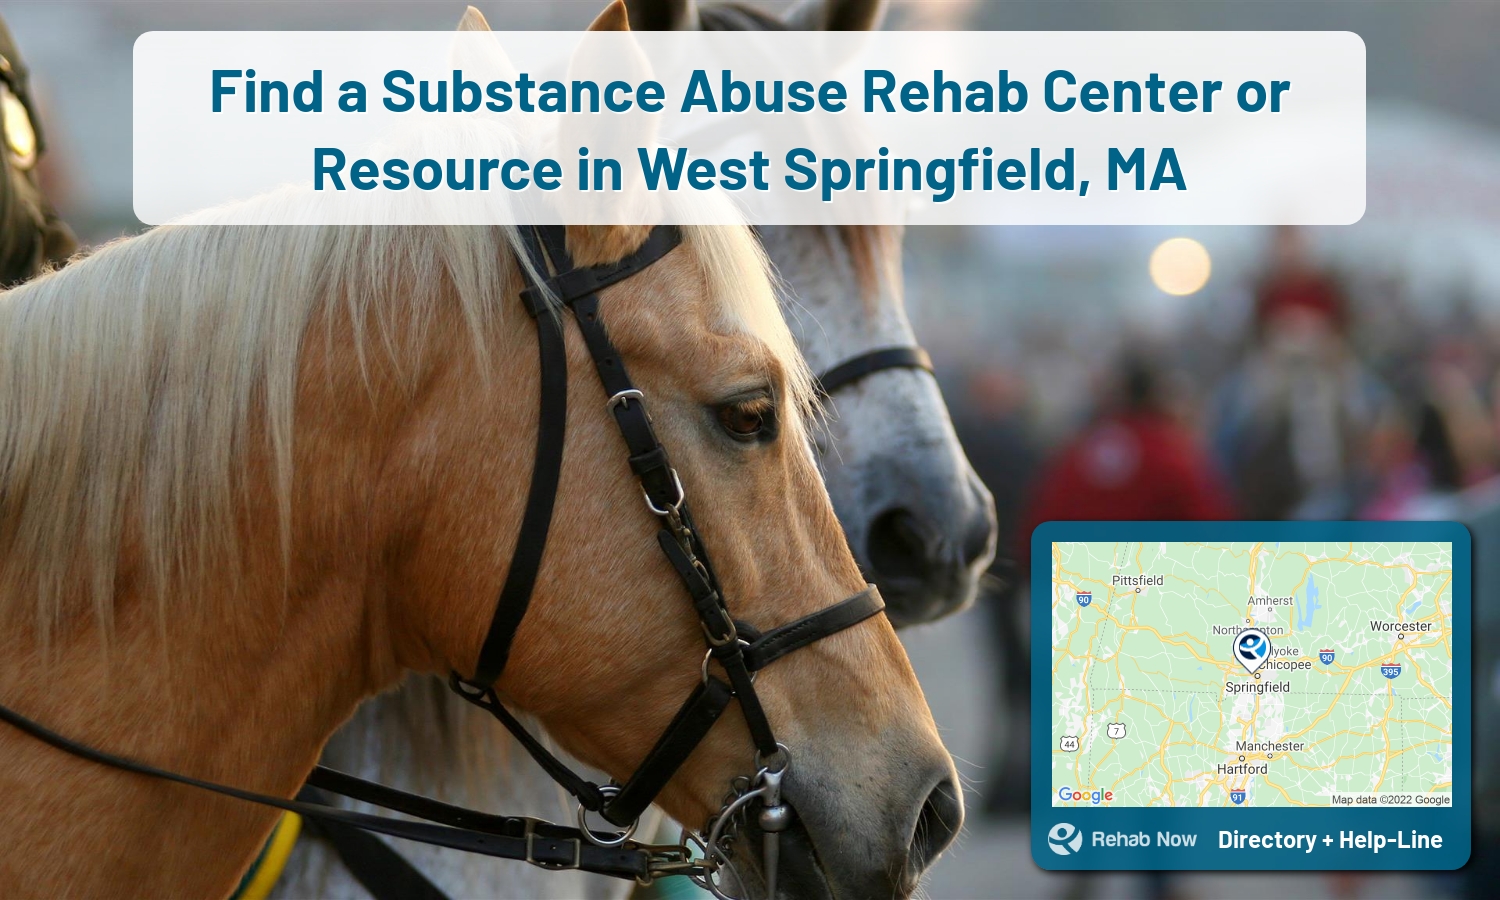 Our experts can help you find treatment now in West Springfield, Massachusetts. We list drug rehab and alcohol centers in Massachusetts.